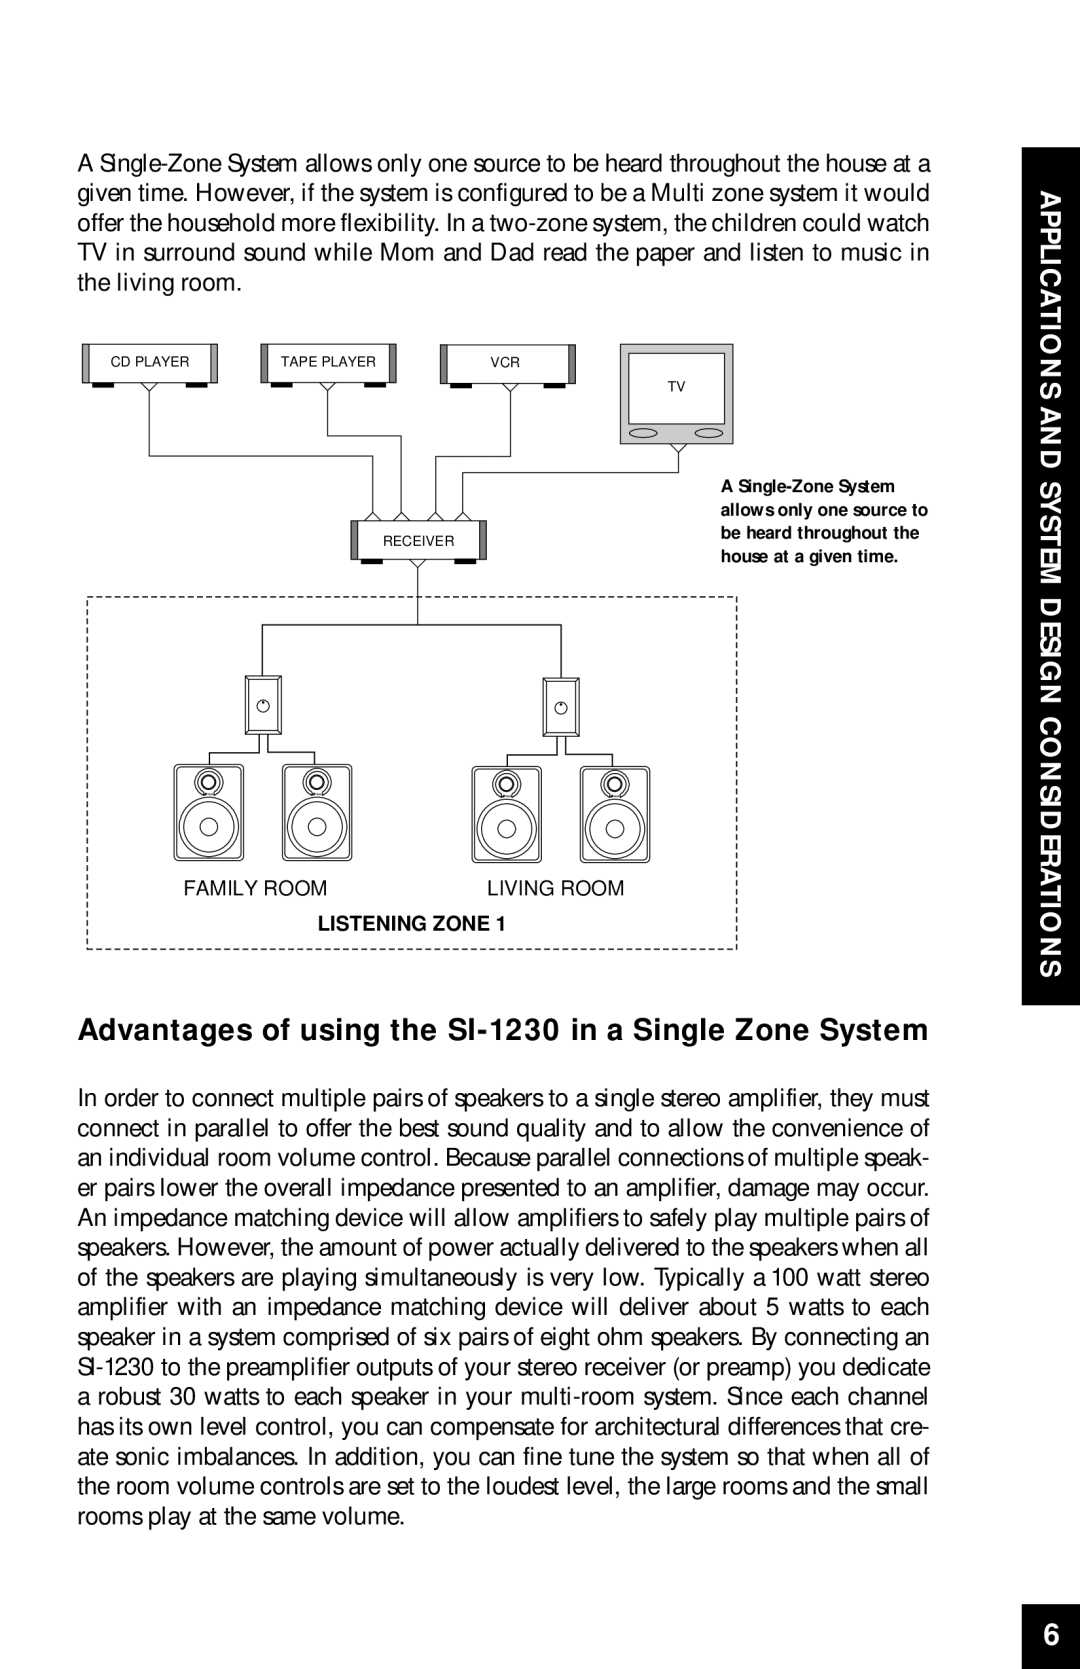 Niles Audio SI-1230 manual And System Design Considerations, Applications 